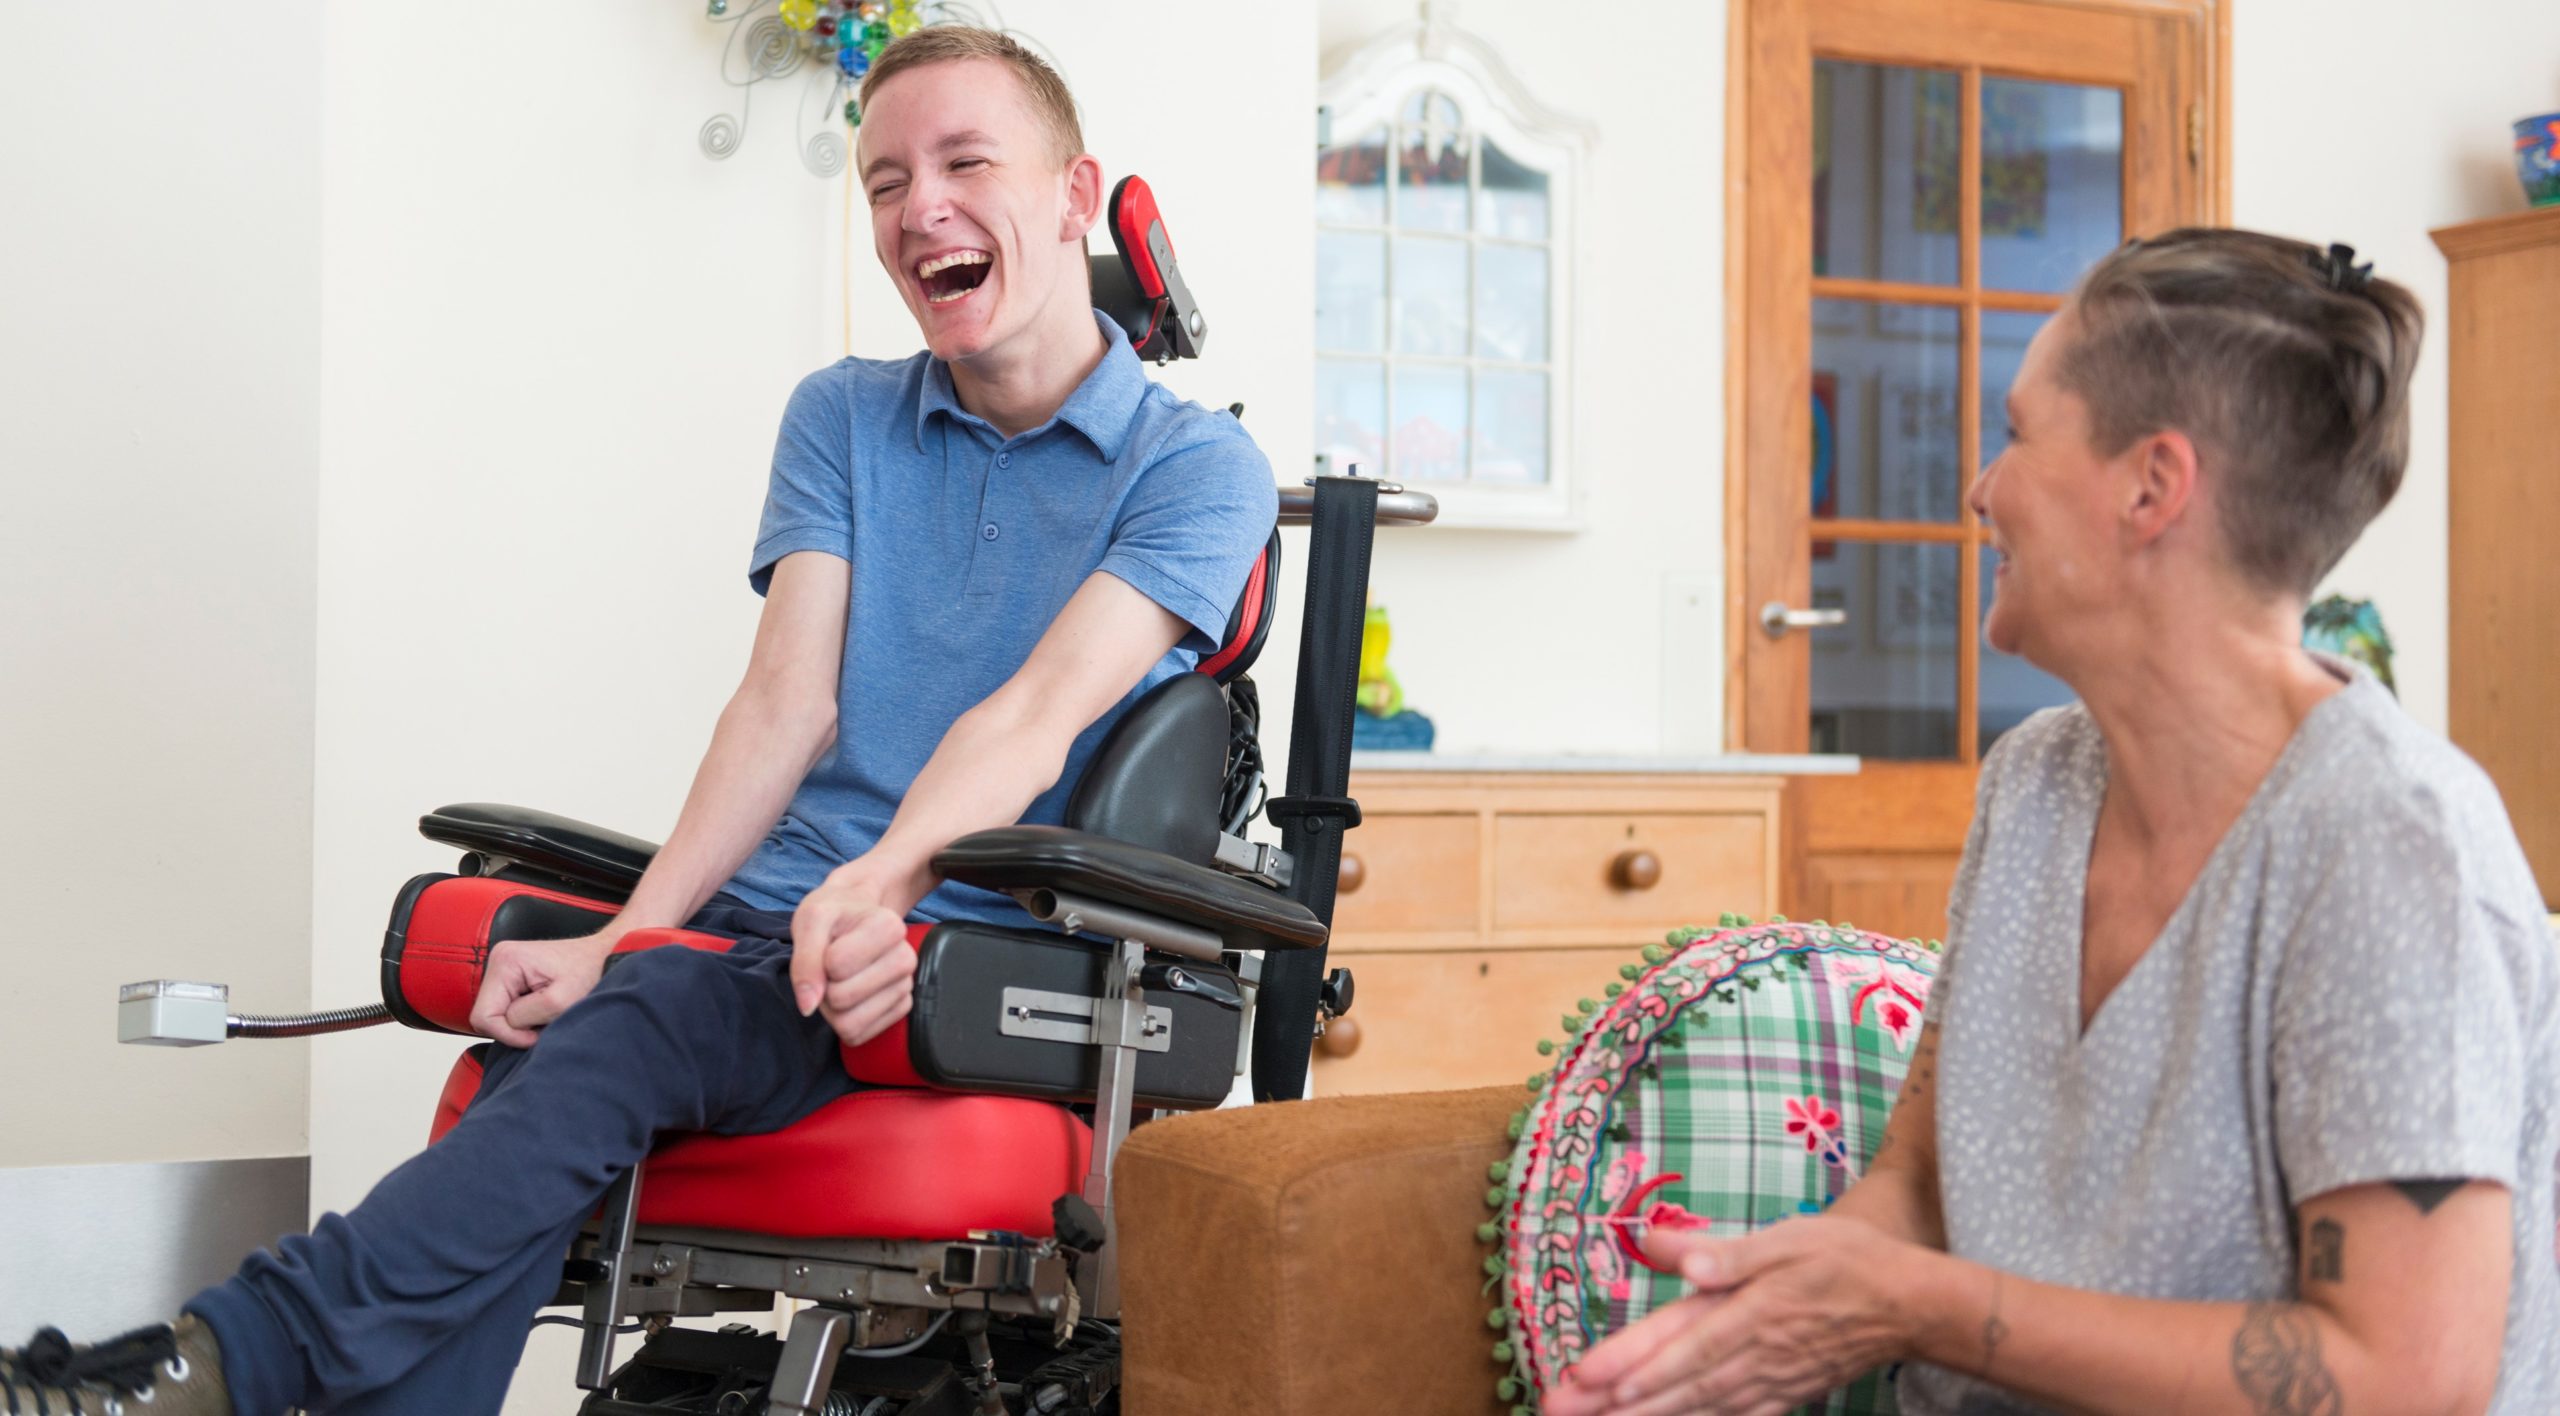 A young, physically impaired ALS patient in a red chair laughs with a caregiver in a grey shirt.